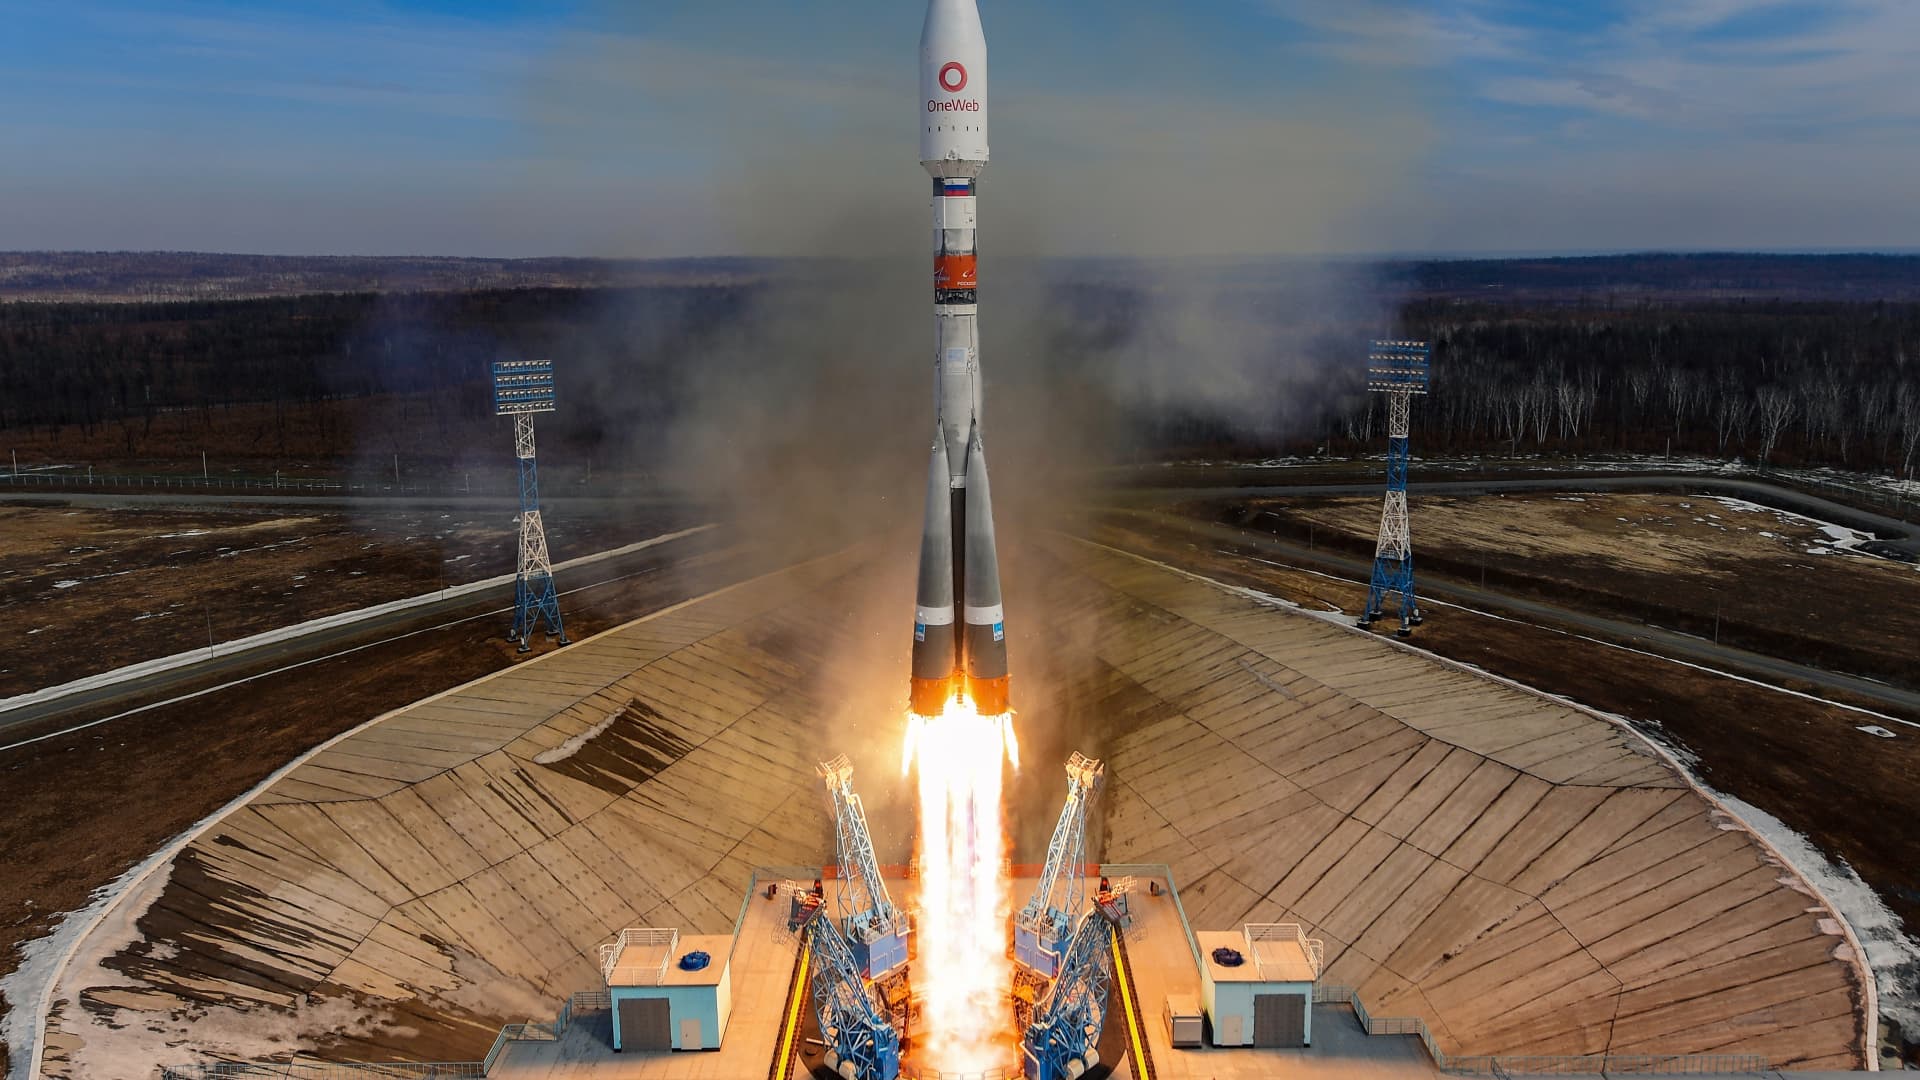 A Soyuz 2 rocket launches 36 OneWeb satellites on March 25, 2020 from Vostochny Cosmodrome, Russia.